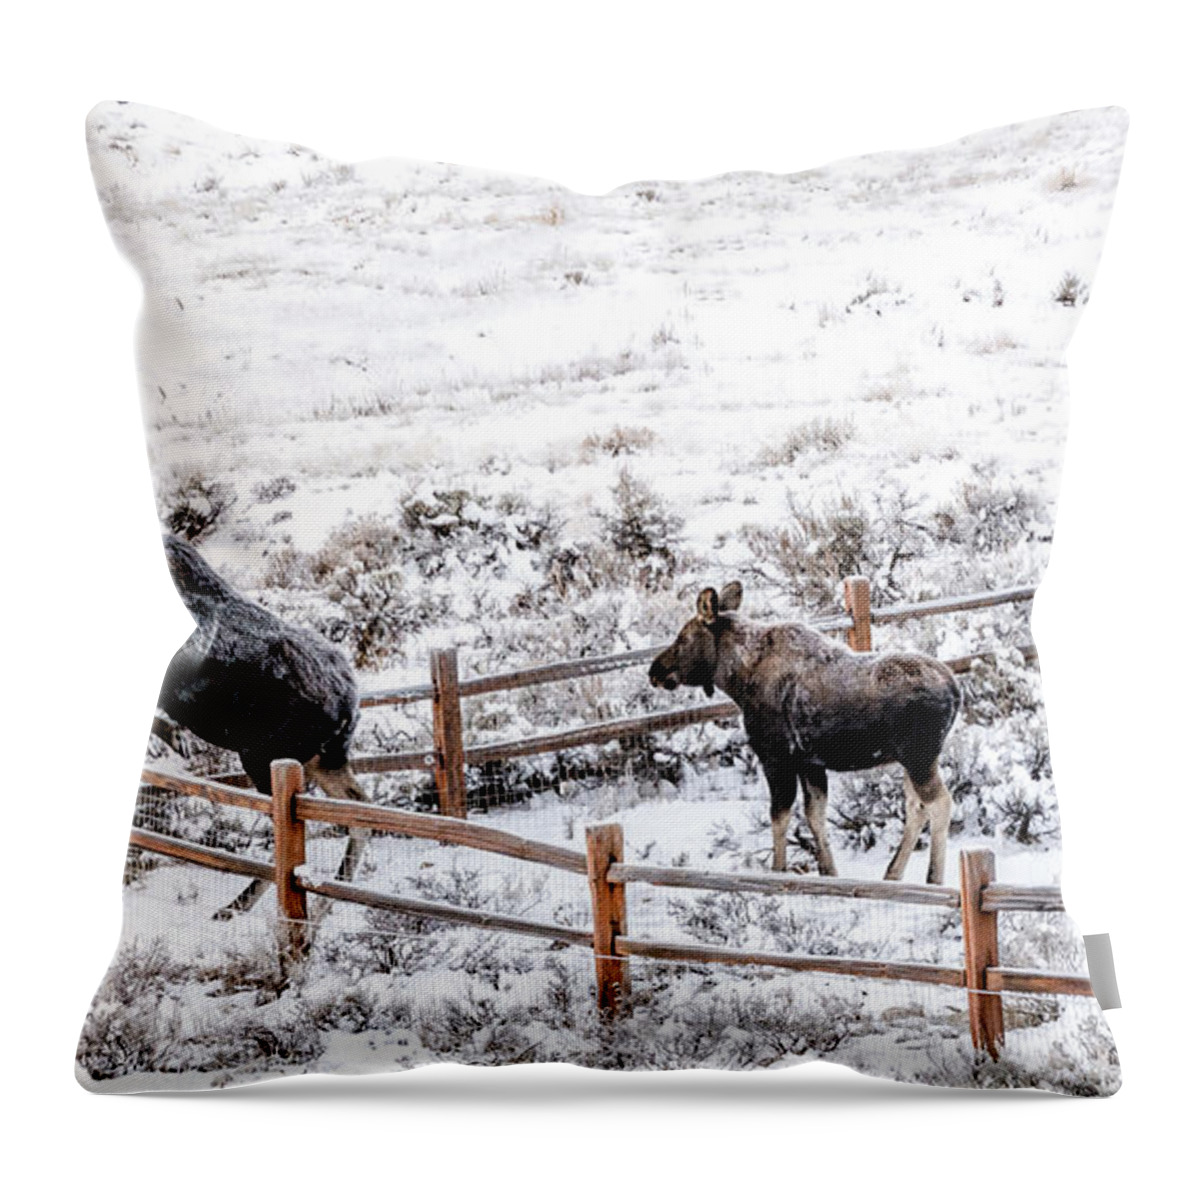 Cow Moose Throw Pillow featuring the photograph Cow Moose Leaping Fence by Stephen Johnson